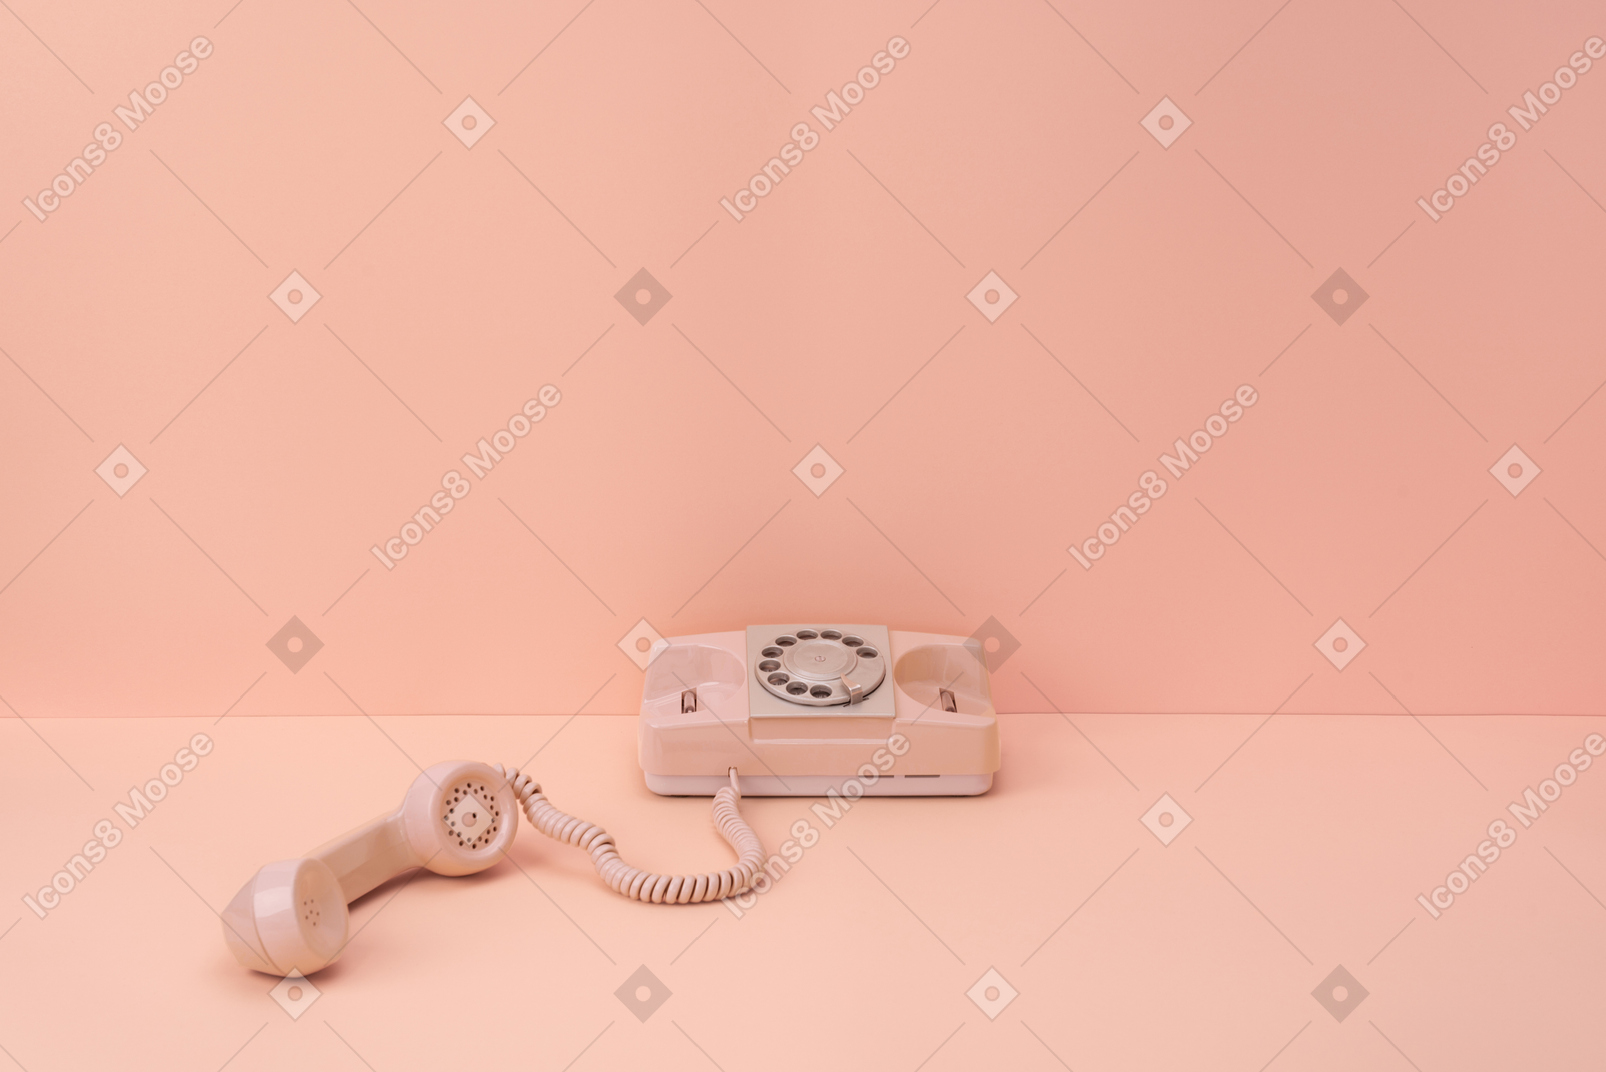 Hang up the telephone